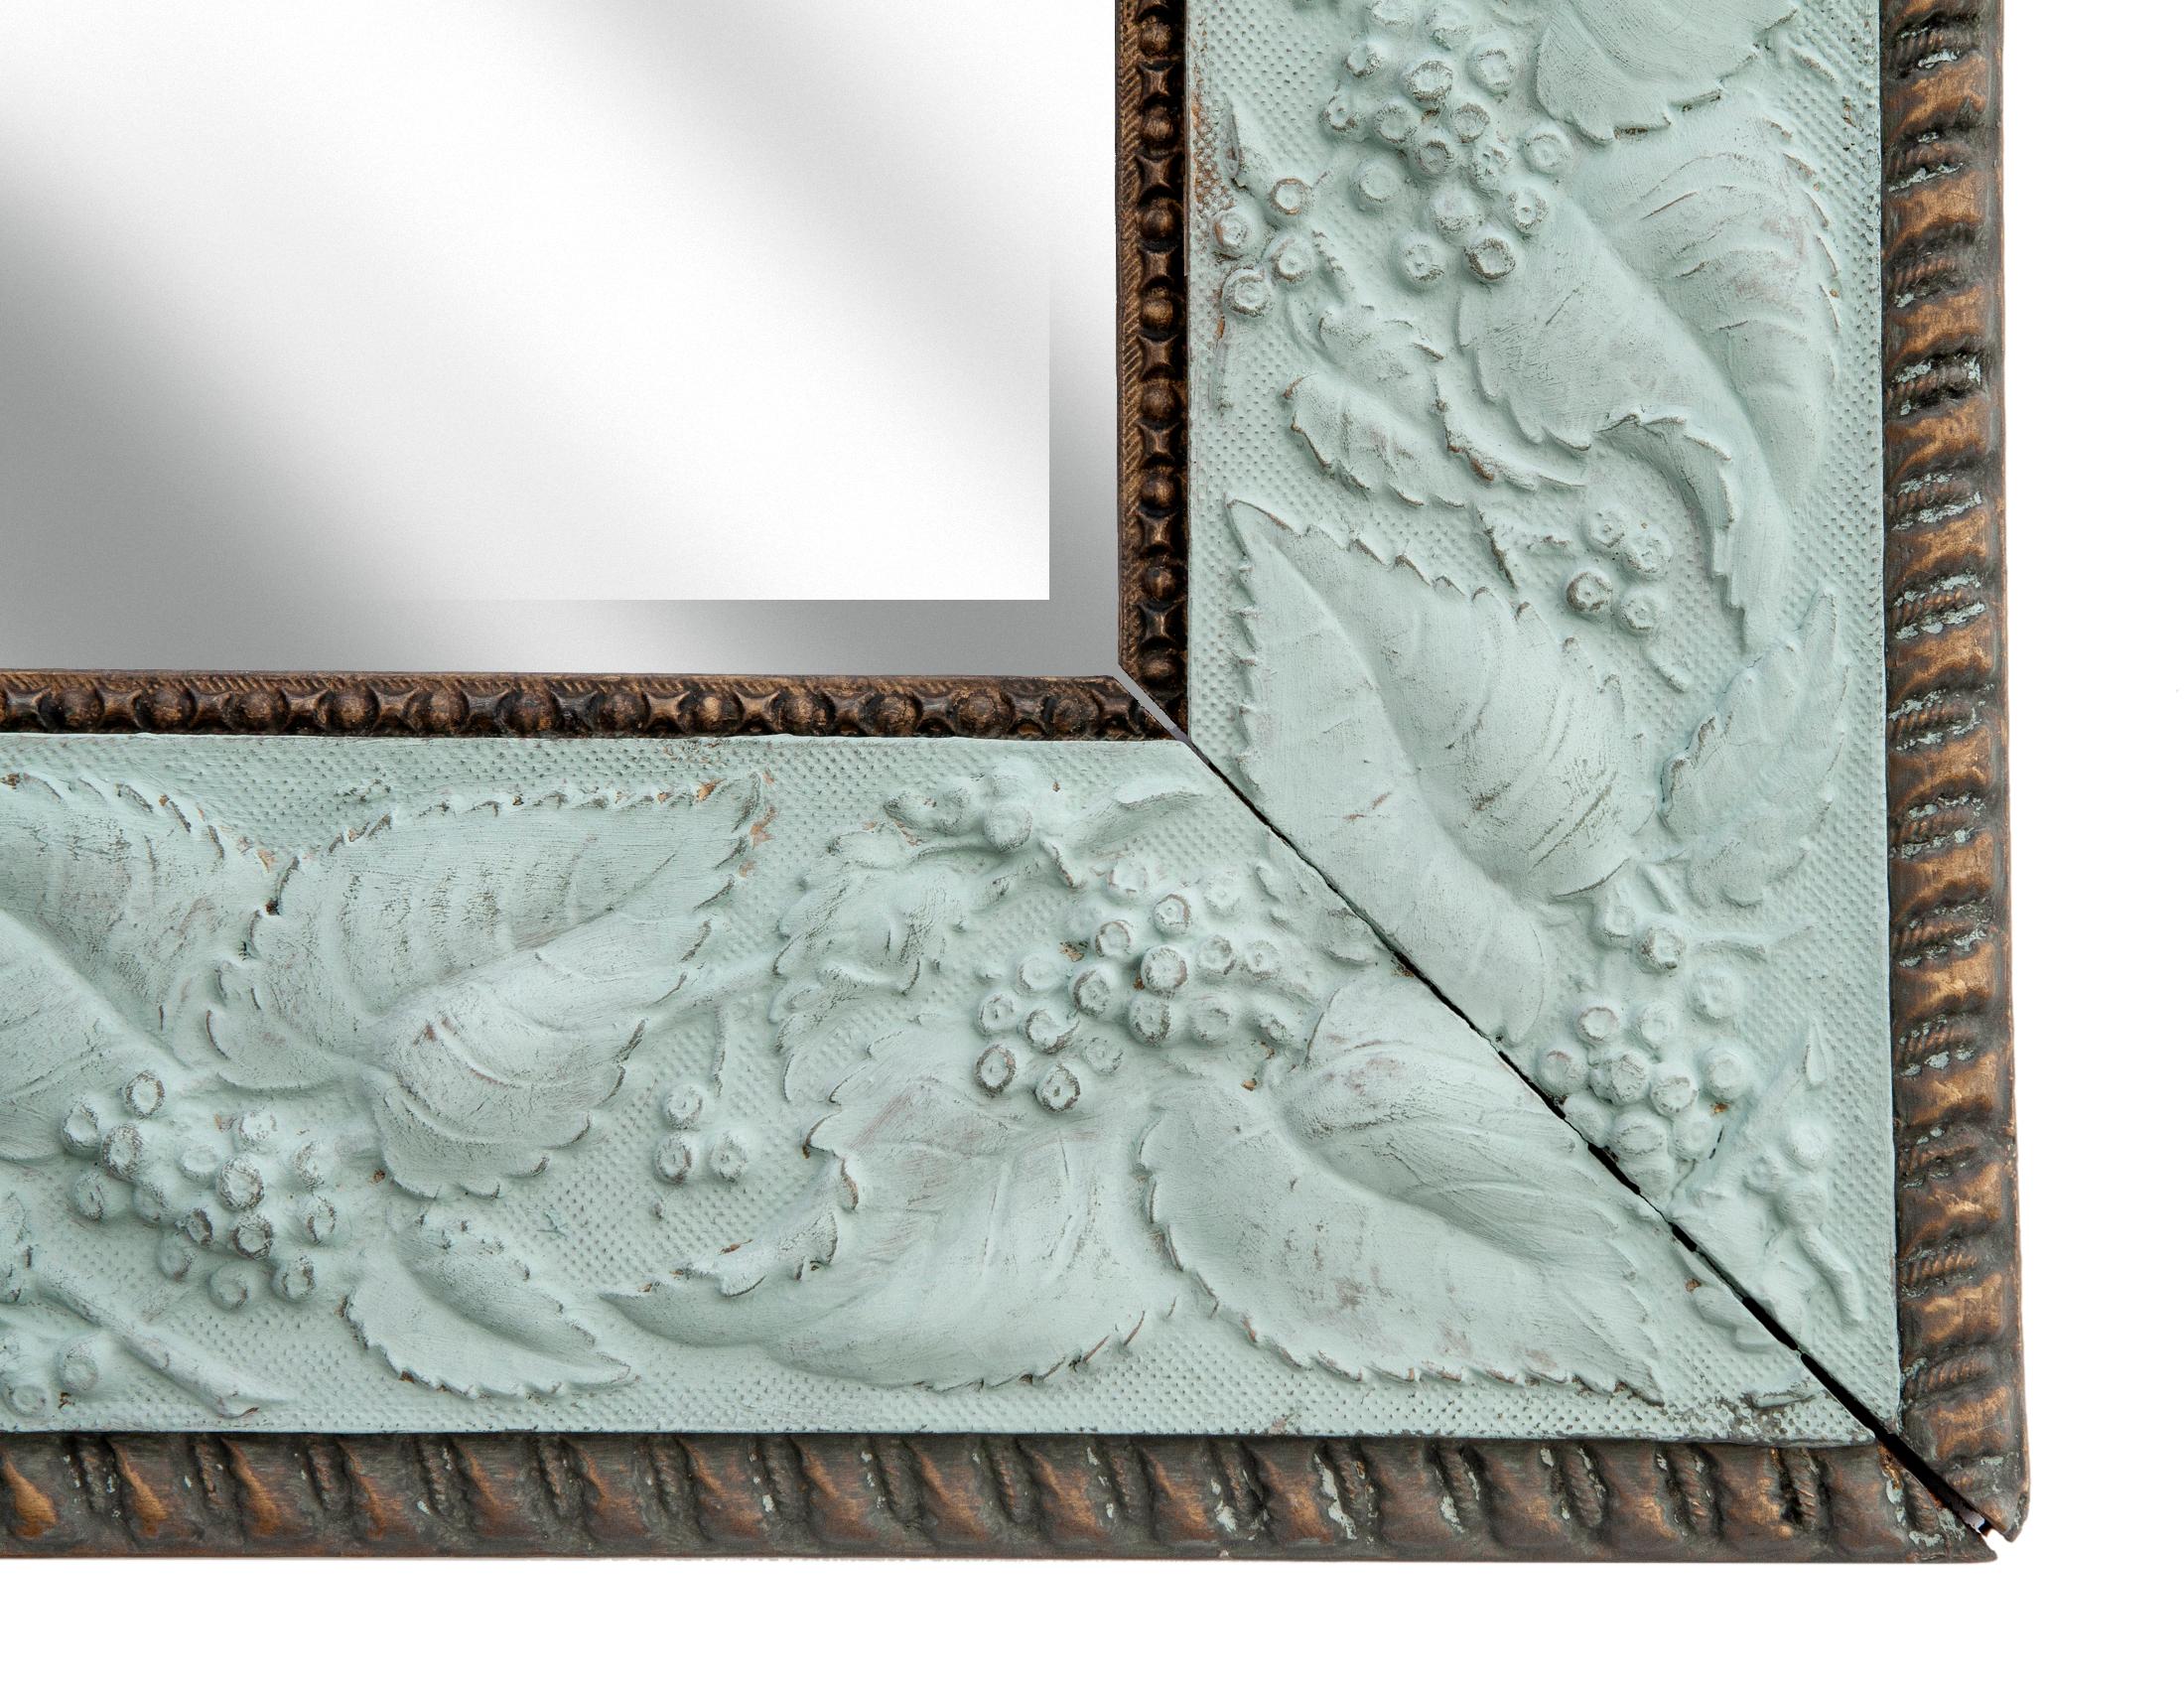 19th Century Antique Aesthetic Movement Framed Beveled Mirror  In Good Condition For Sale In Malibu, CA